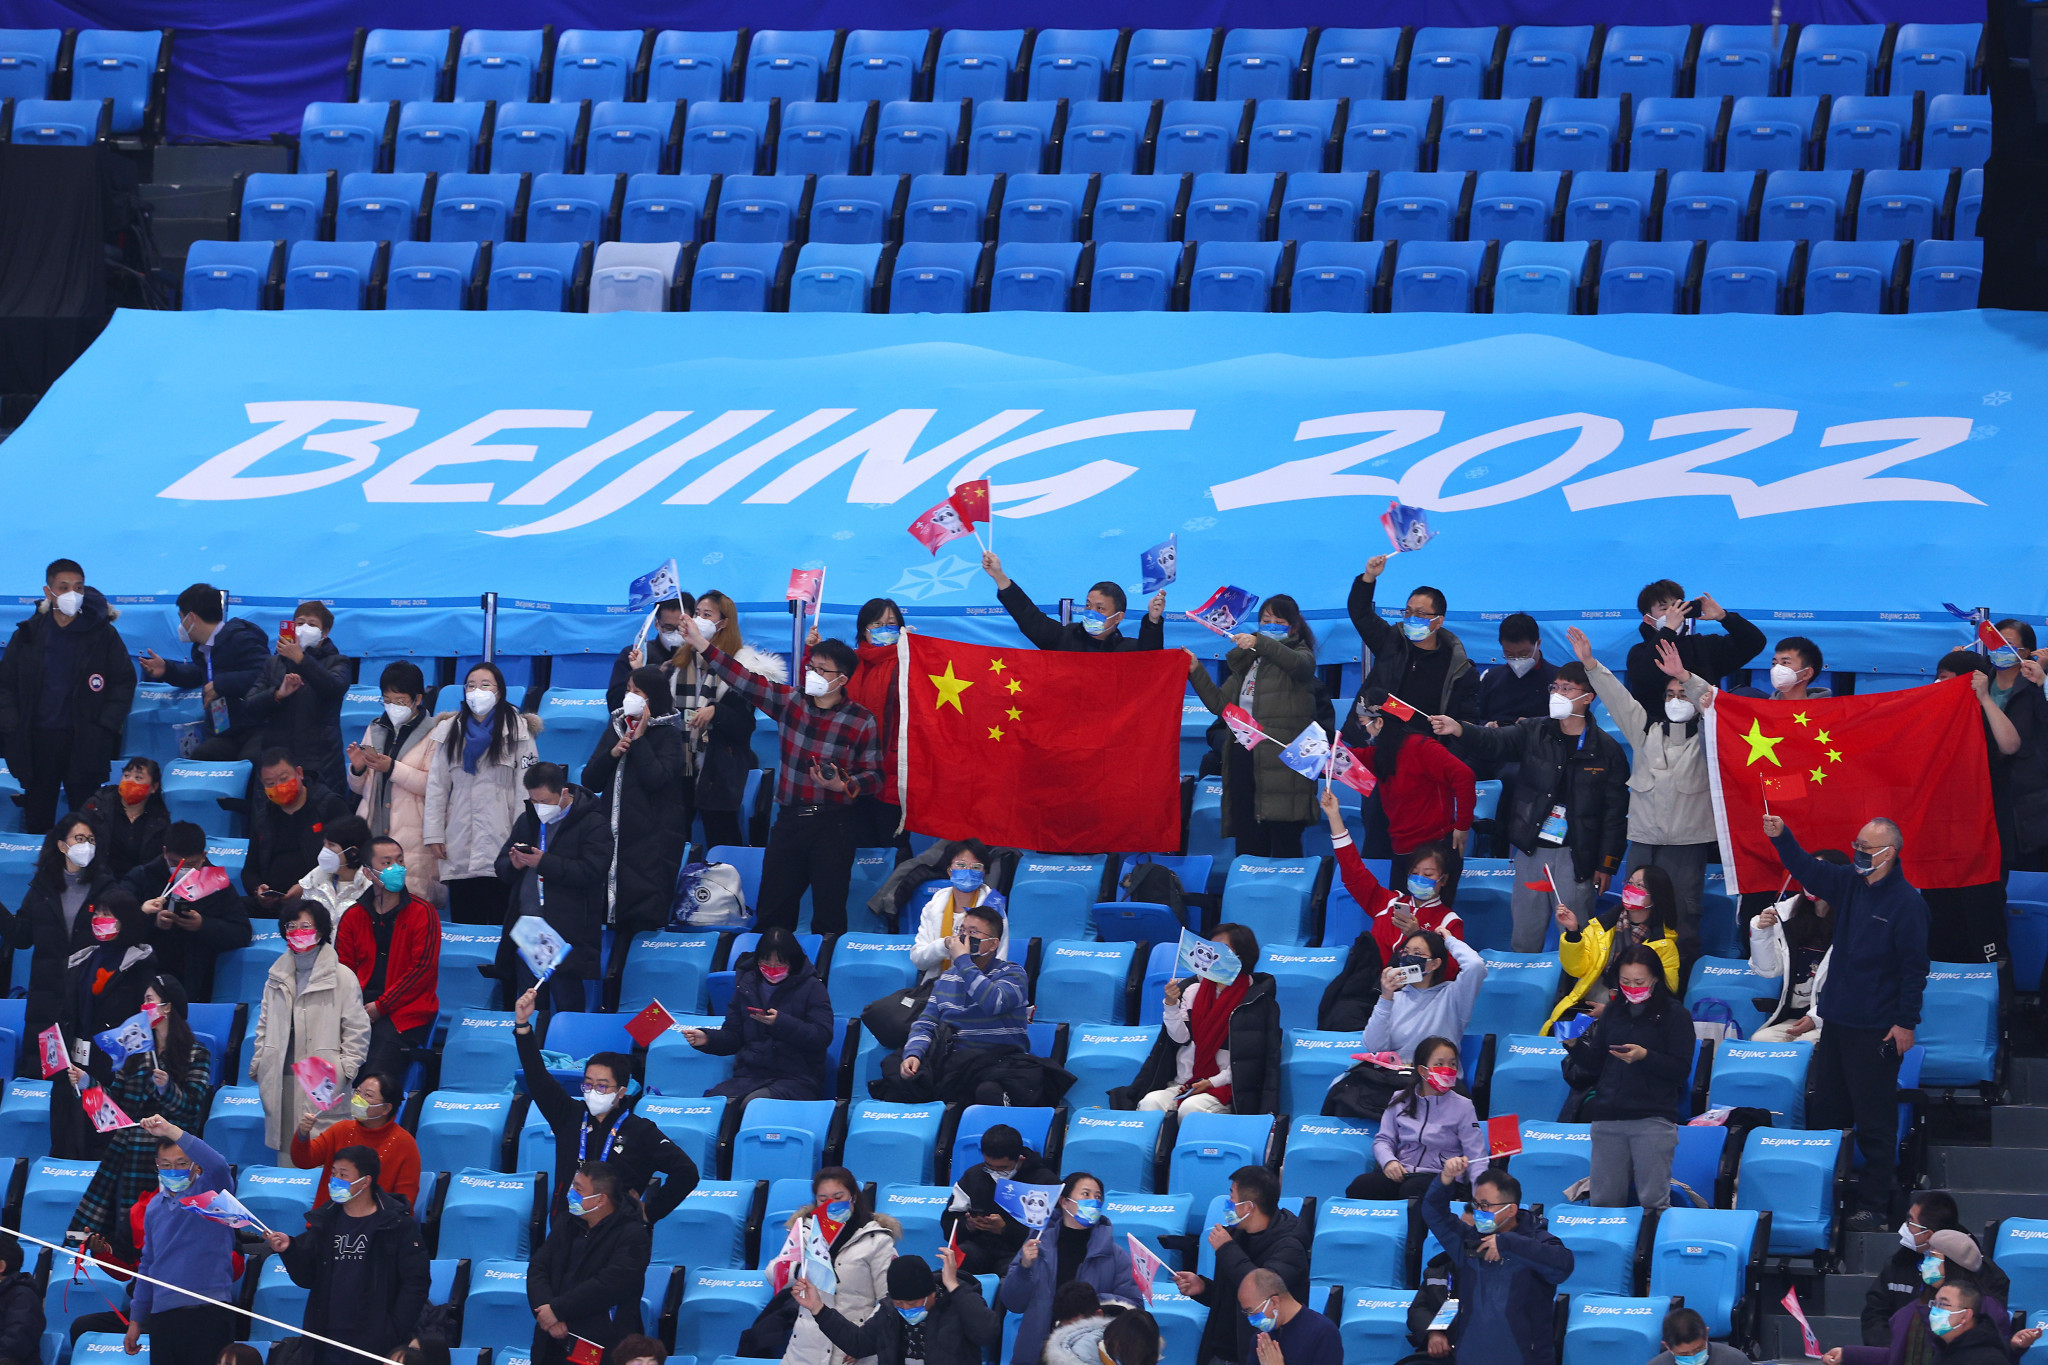 Only limited numbers of spectators were permitted at the Beijing 2022 Winter Olympics earlier this year as a precaution against the spread of COVID  ©Getty Images